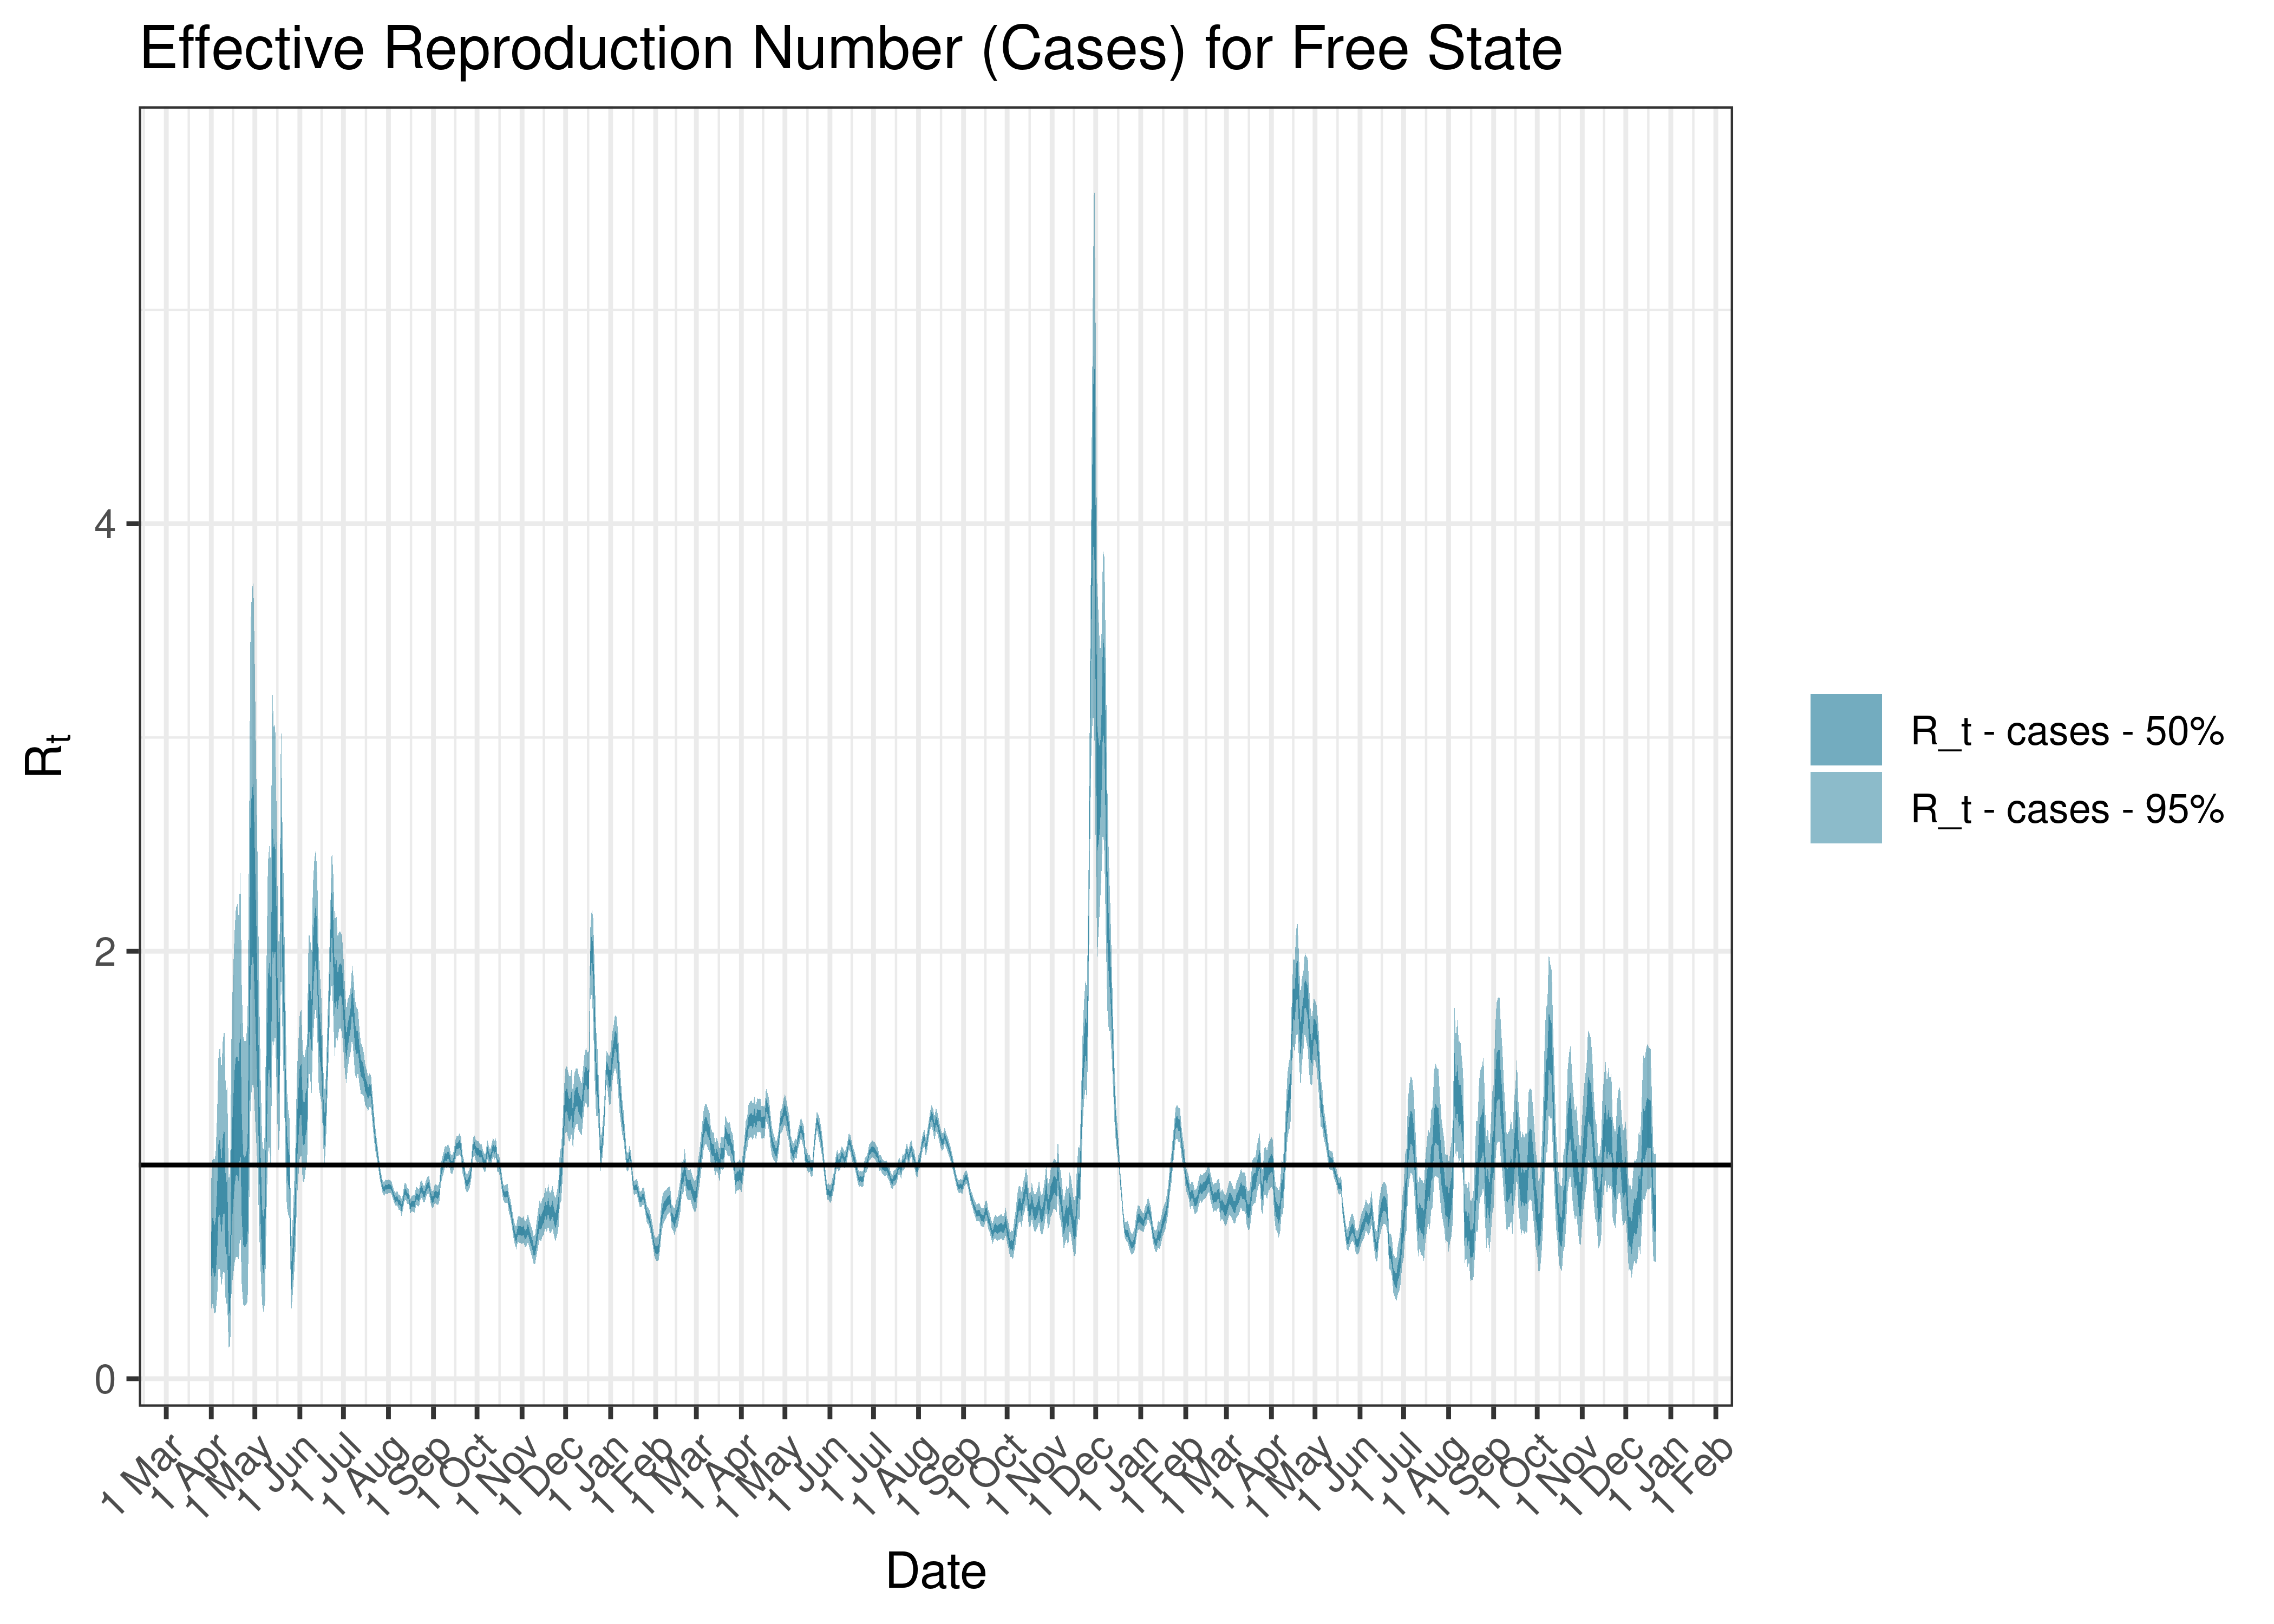 Estimated Effective Reproduction Number Based on Cases for Free State since 1 April 2020